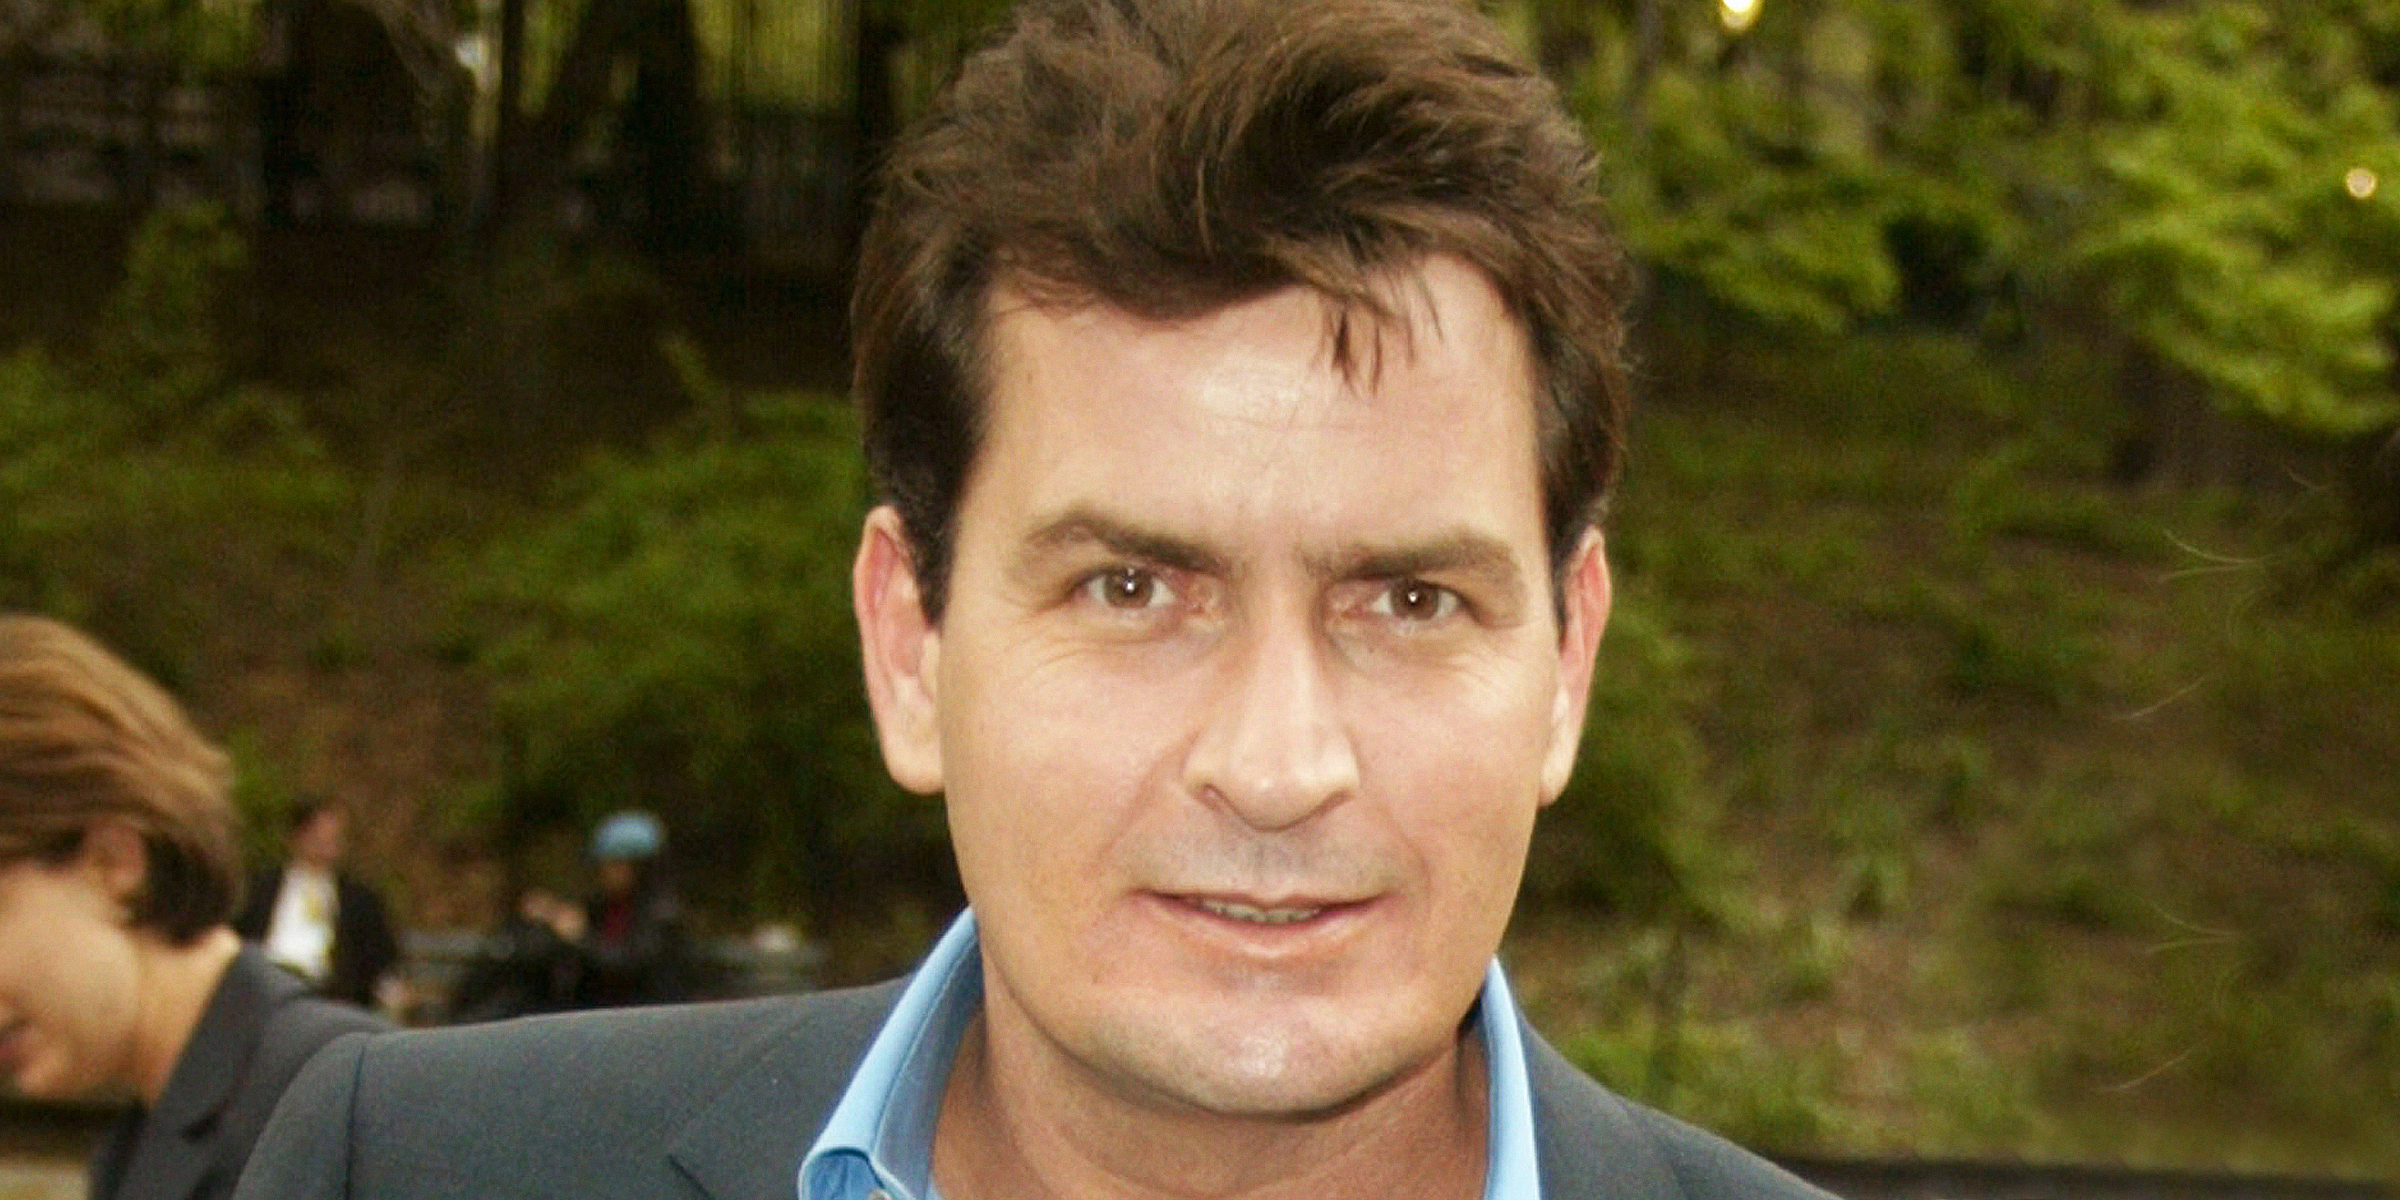 Charlie Sheen | Source : Getty Images